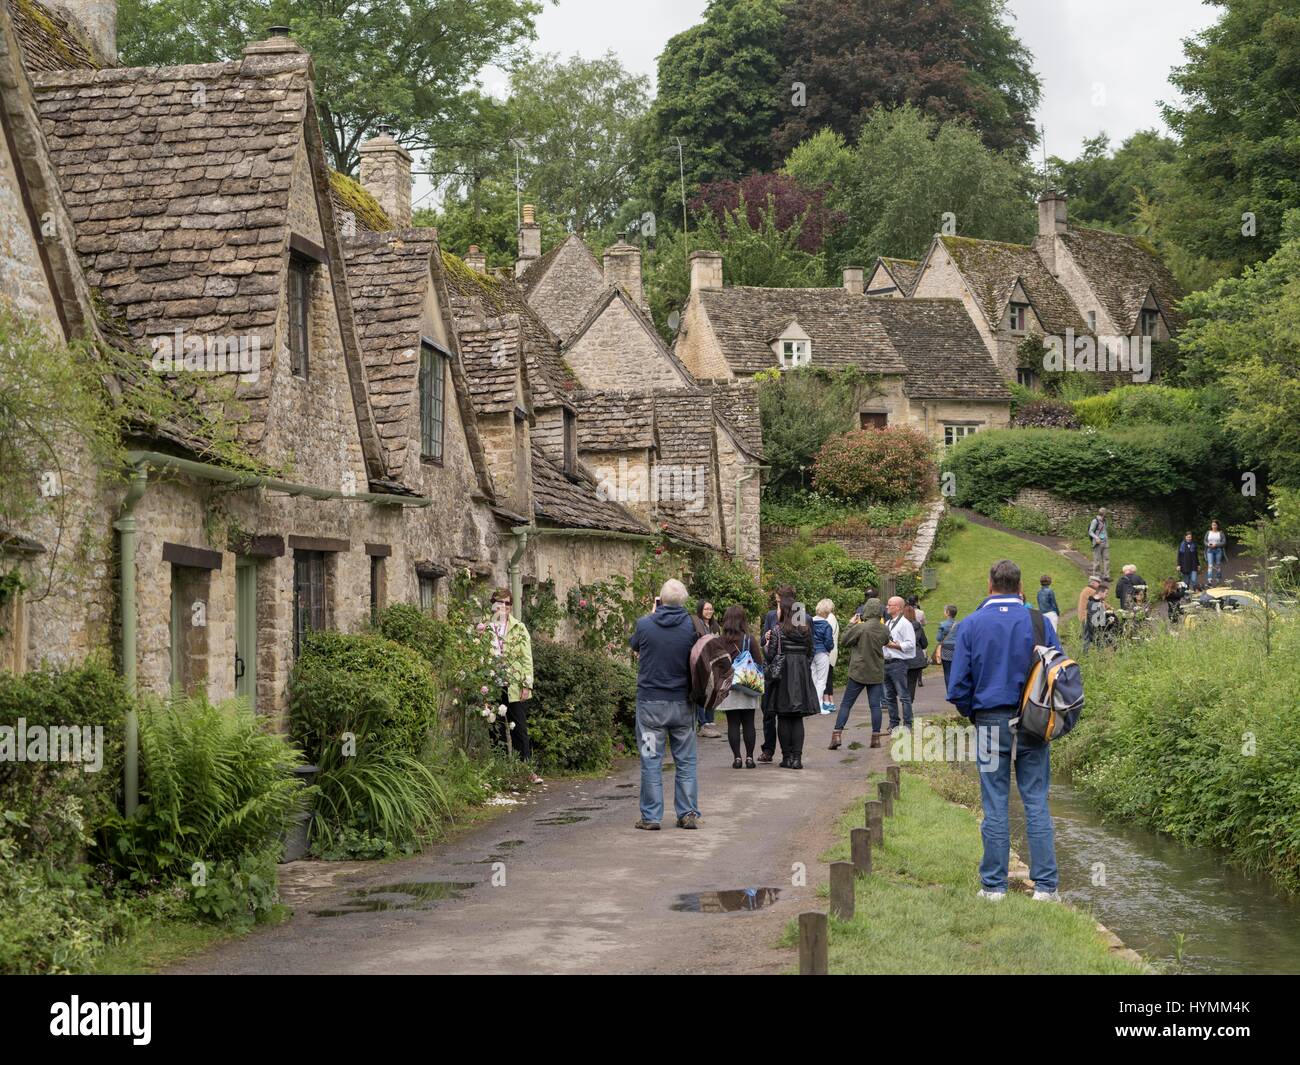 Beautiful Cottages At Arlington Row In Cotswolds Village Of Bibury